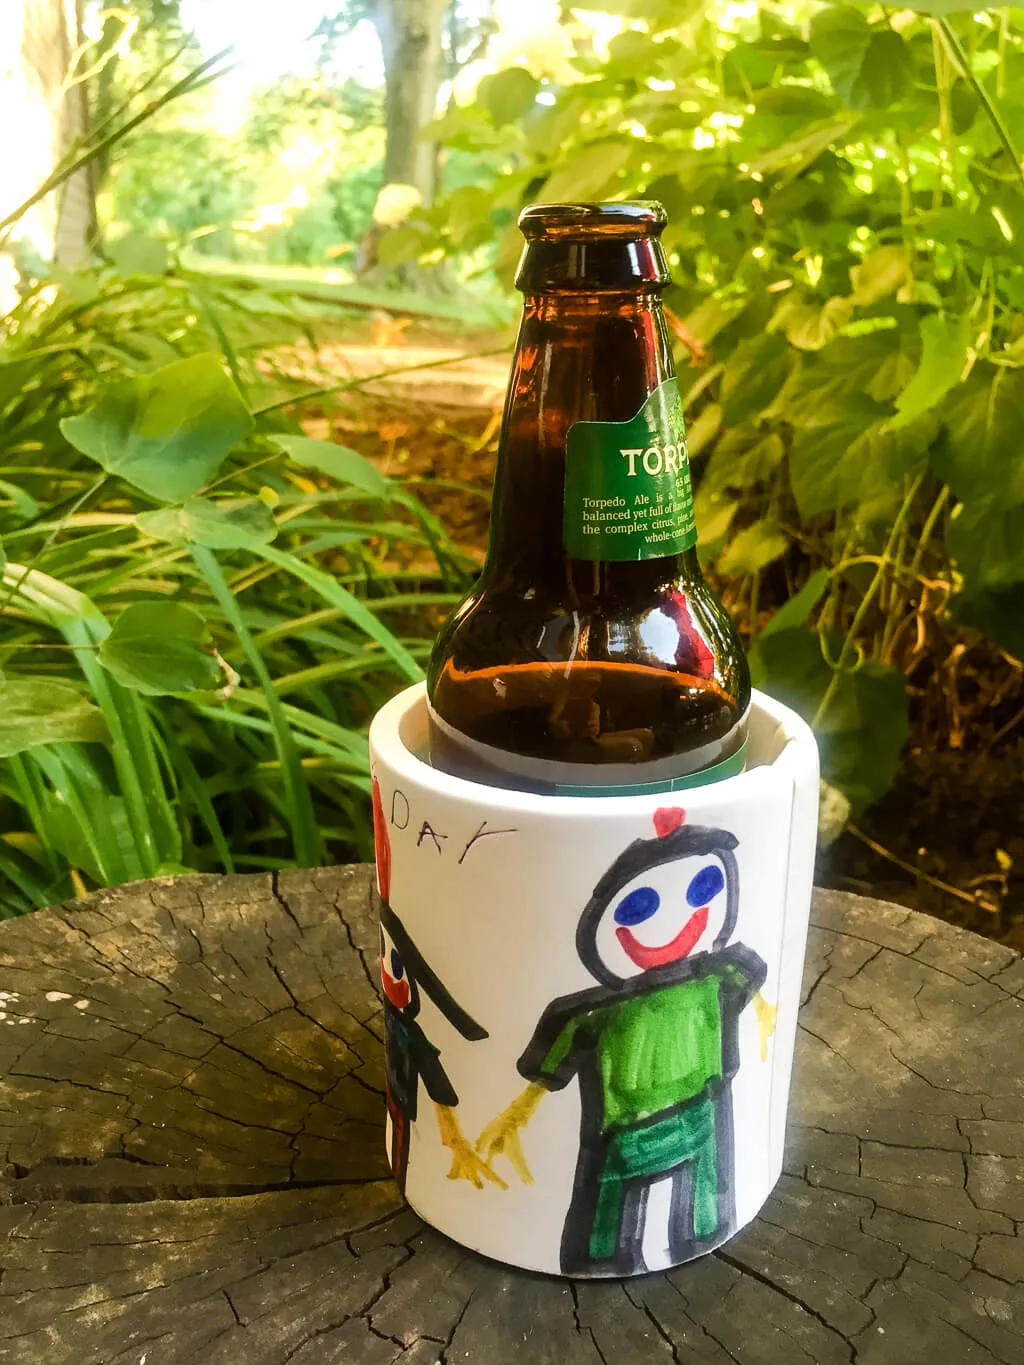 https://www.merrimentdesign.com/images/diy-drink-coozie-cool-bottles-cans-fathers-day-gift_4.jpg.webp